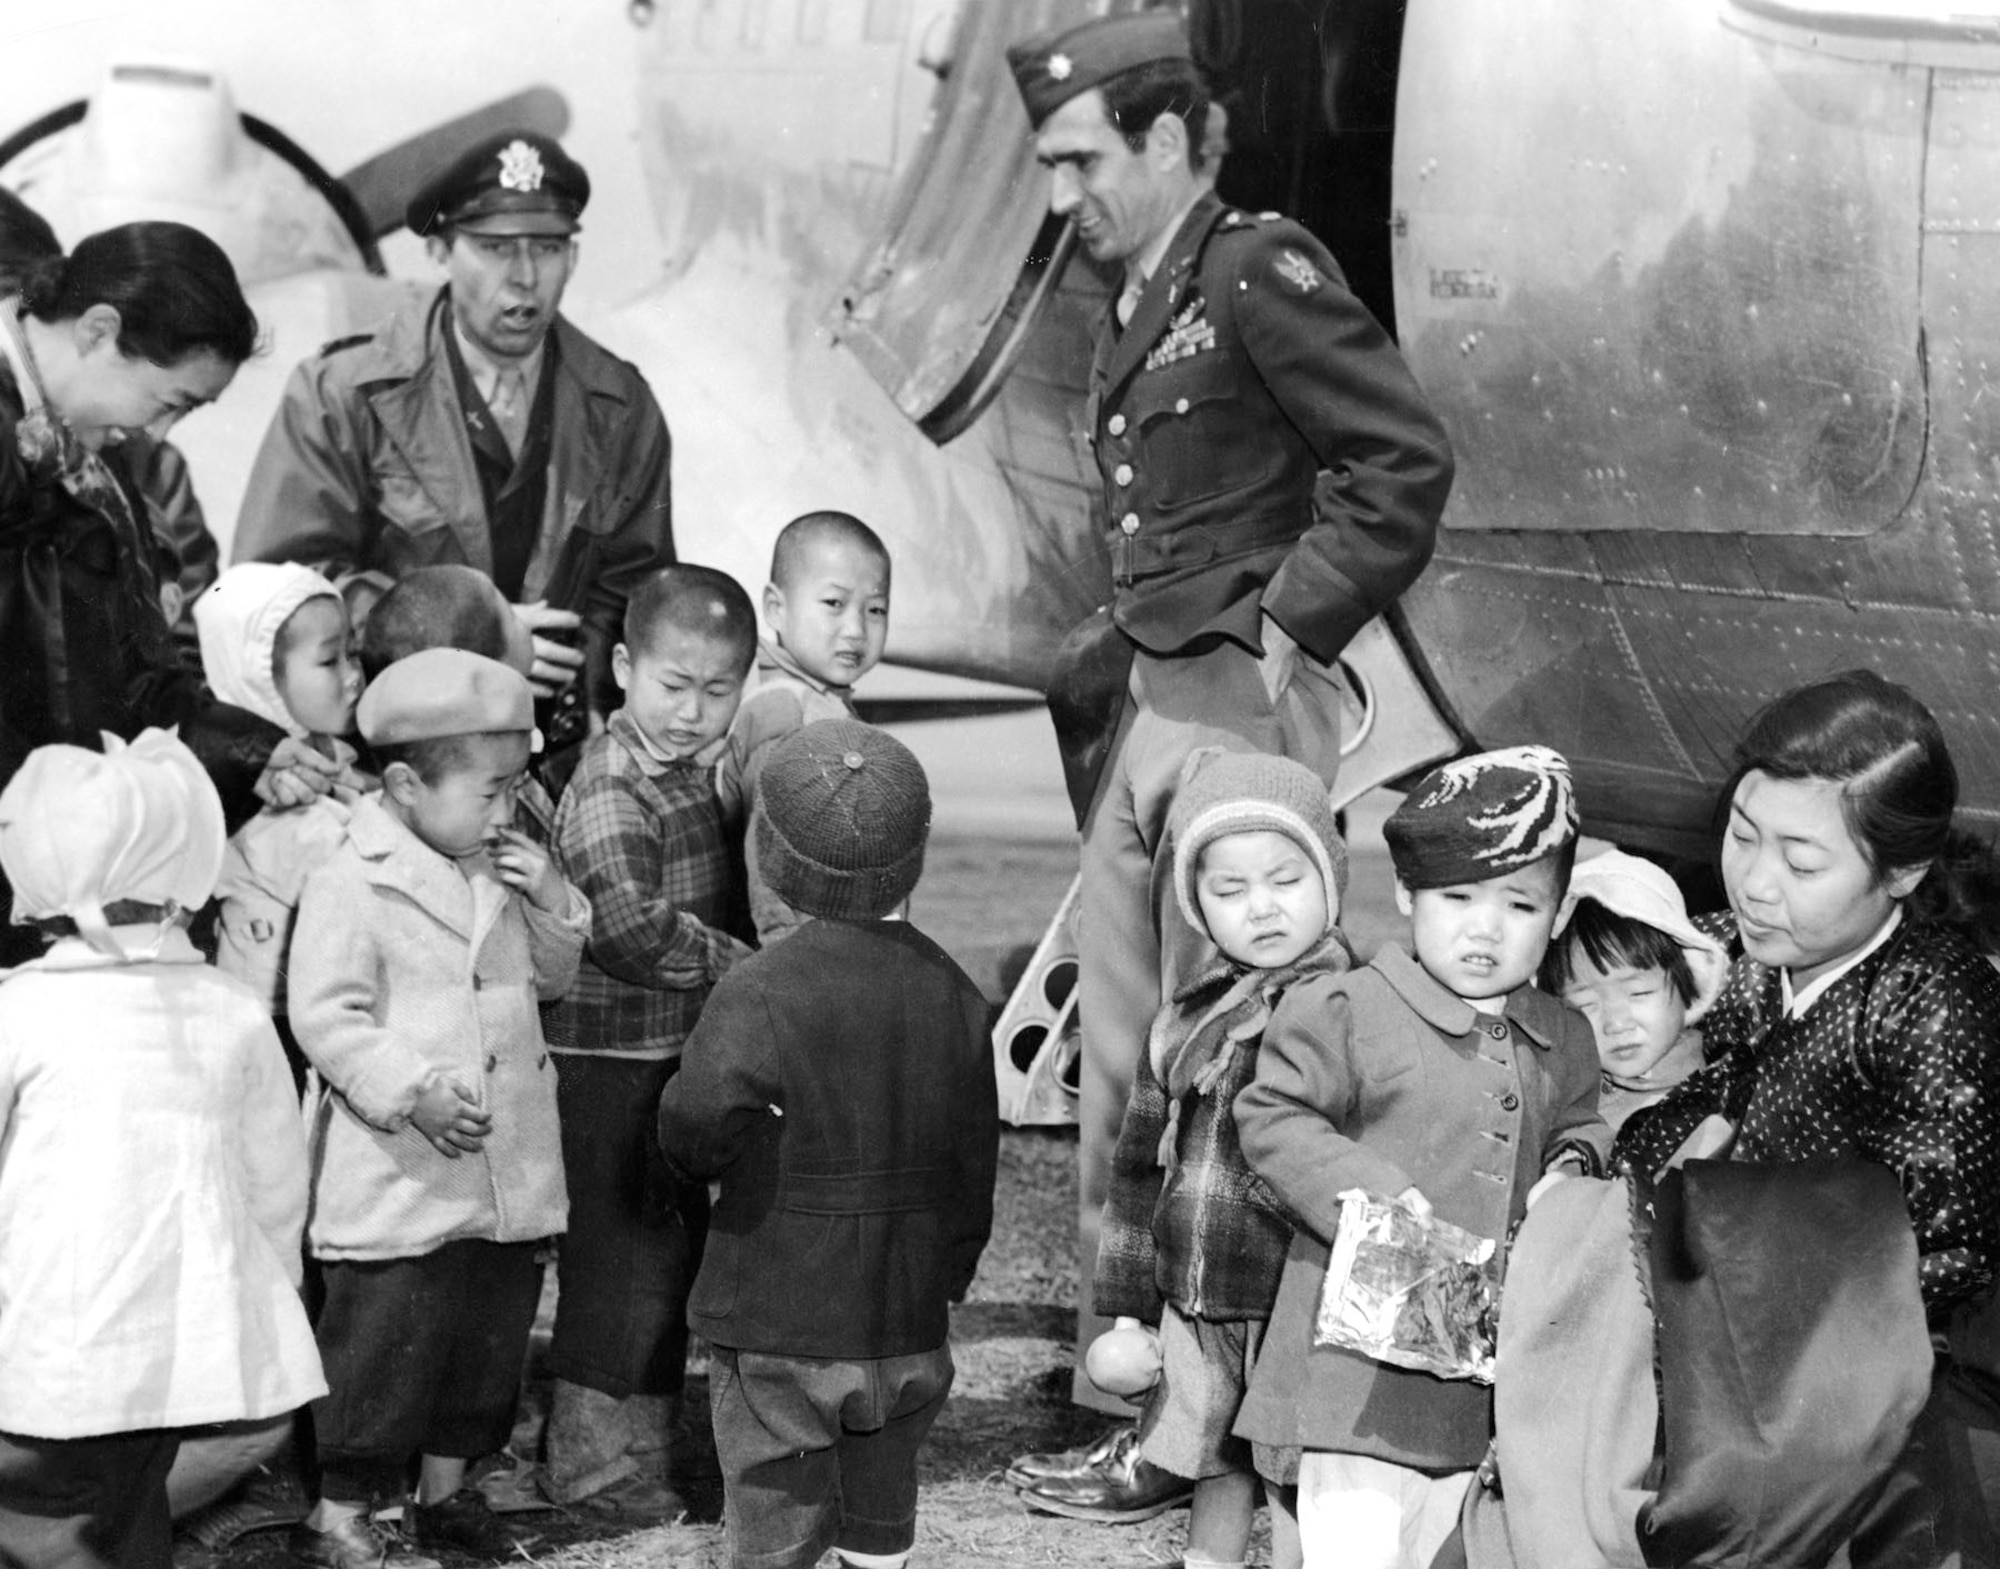 Chaplain Lt. Col. Russell Blaisdell (left) and Lt. Col. Dean Hess (right) on a return visit to Cheju-do. The children were now well-fed and clothed. (U.S. Air Force photo)